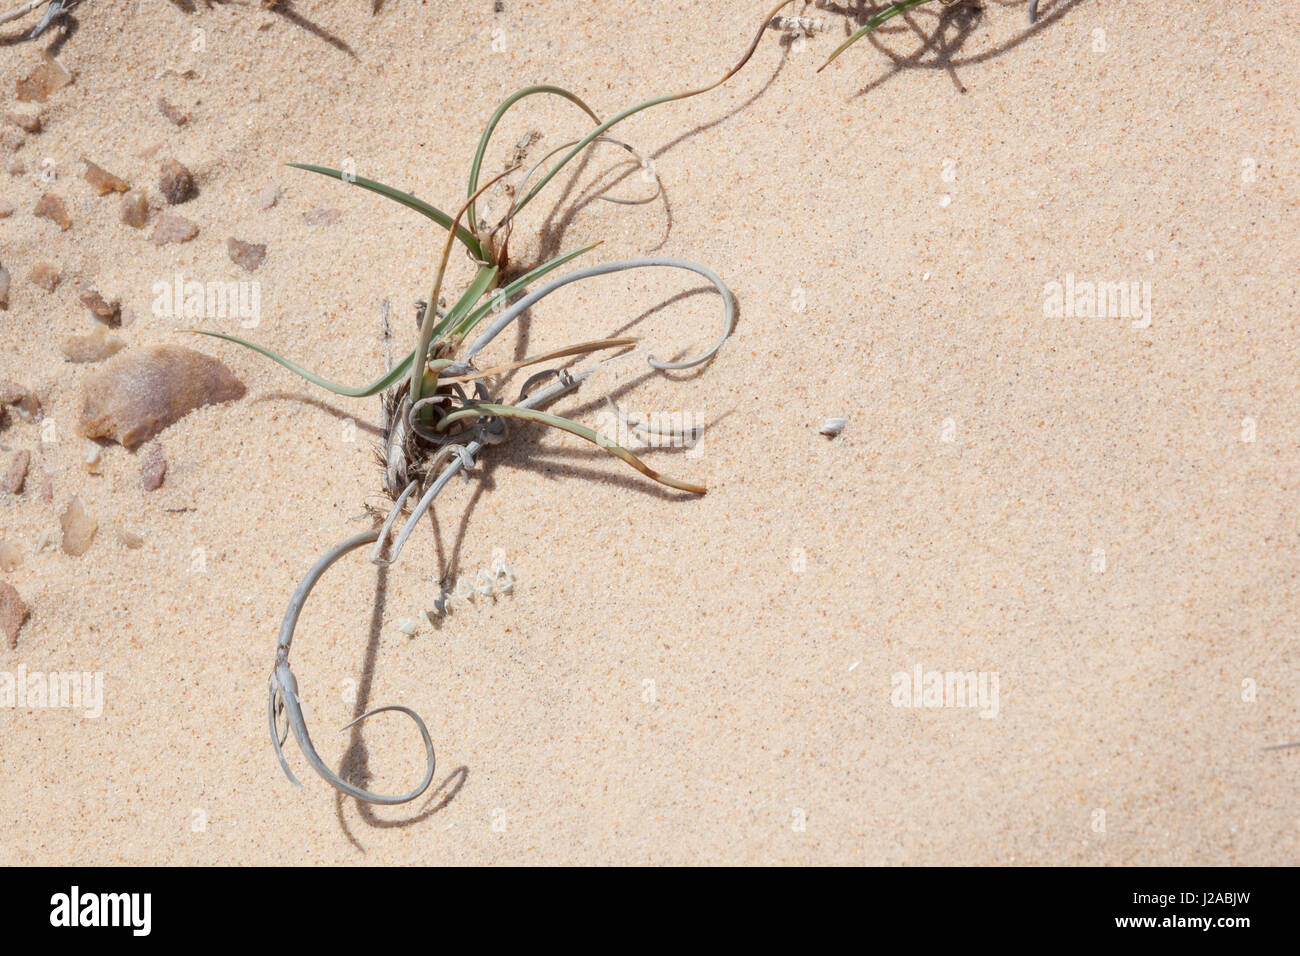 Africa, Western Sahara, Dakhla. Close-up of plant and sand in a desert. Stock Photo